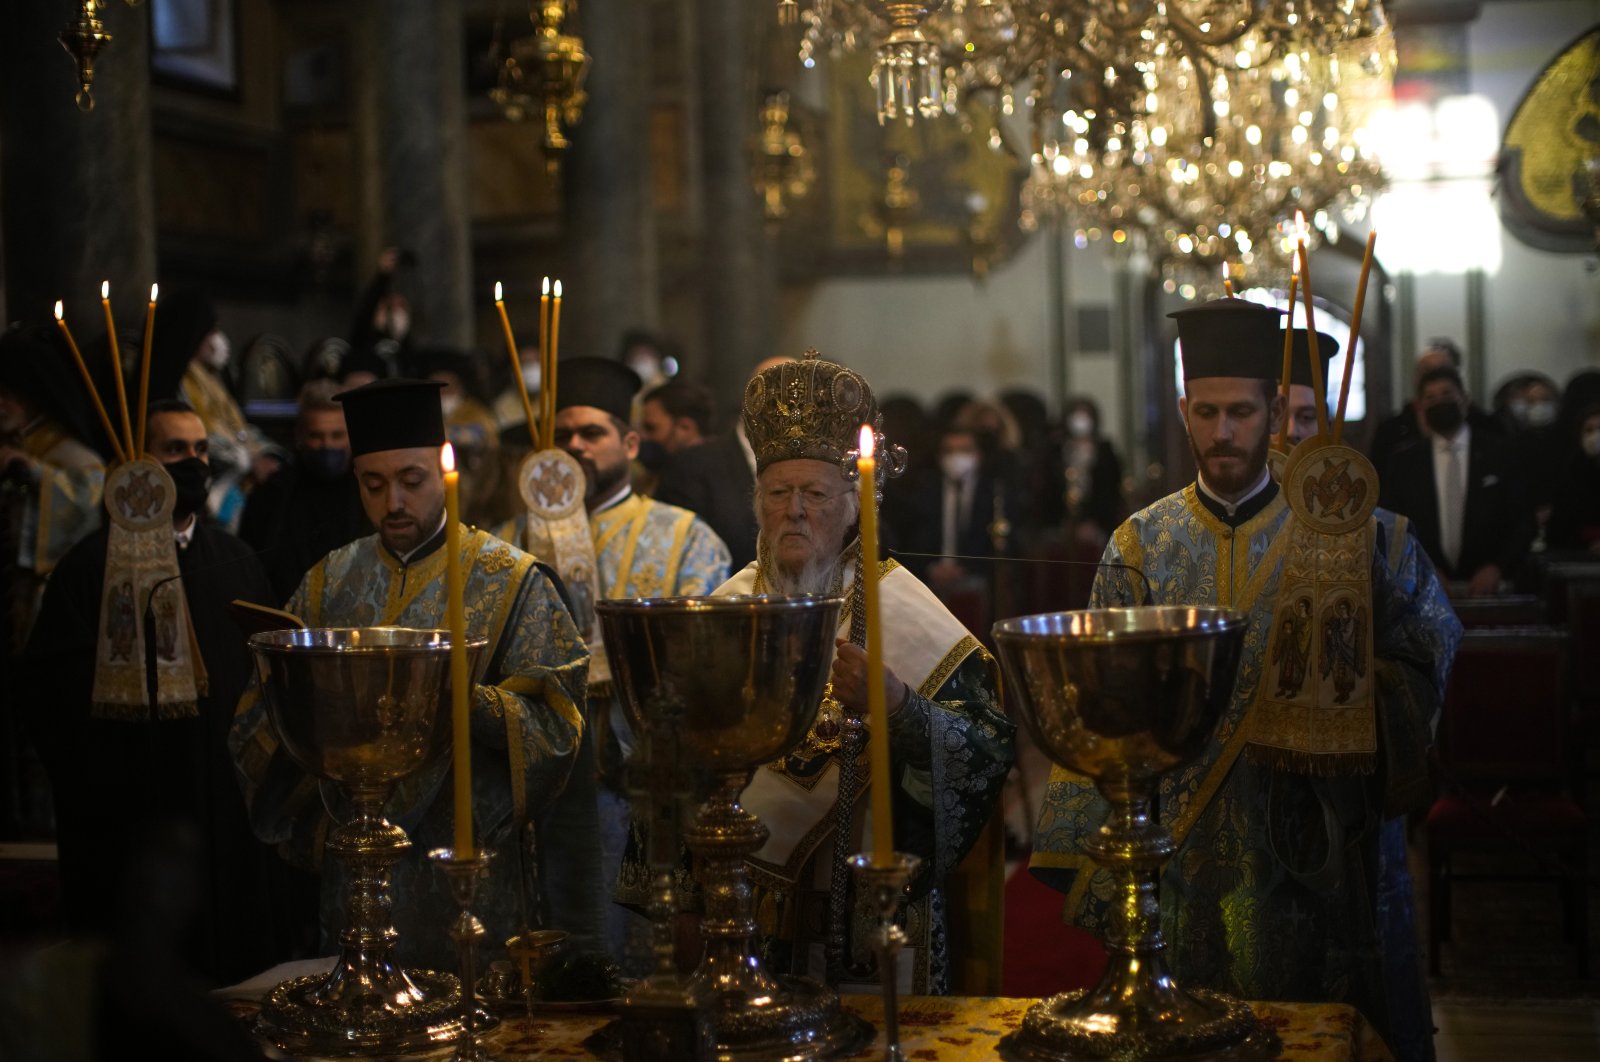 Ecumenical Patriarch Bartholomew I (C), the spiritual leader of the world's Orthodox Christians, leads the Epiphany Mass at the Patriarchal Church of St. George in Istanbul, Turkey, Jan. 6, 2022. (AP File Photo)